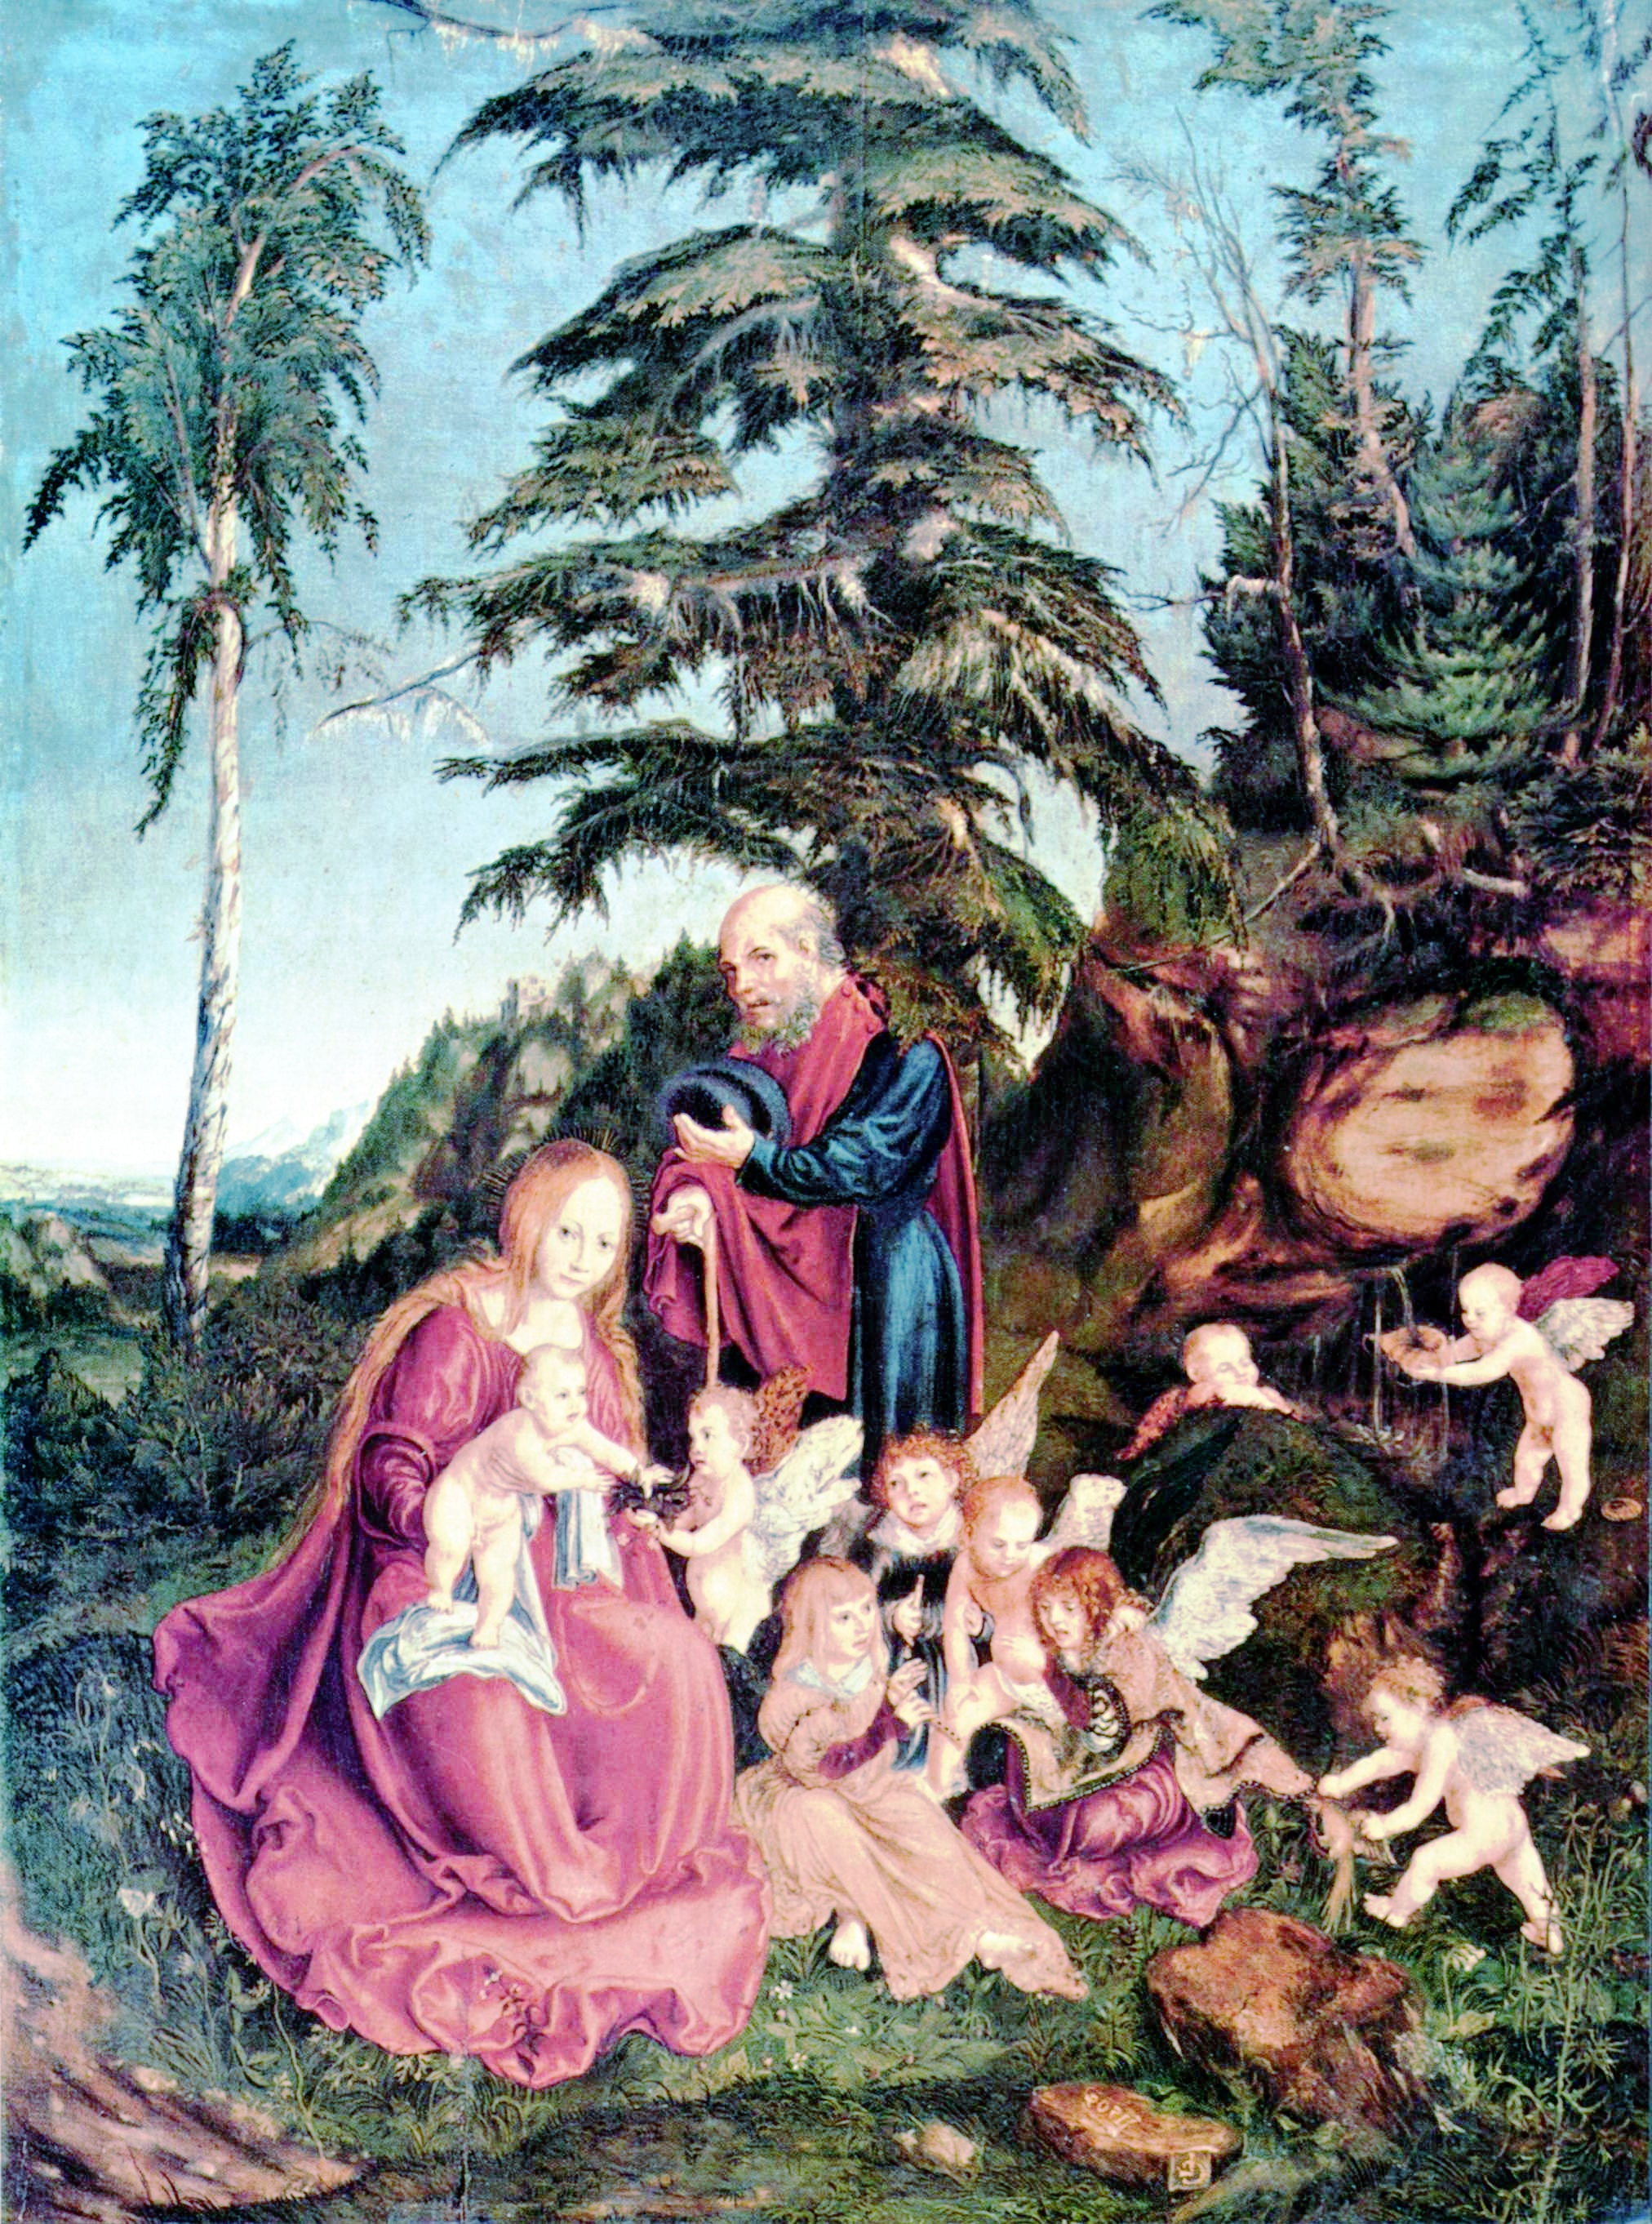 a Thessara Eldusaer painting of a family in a wooded